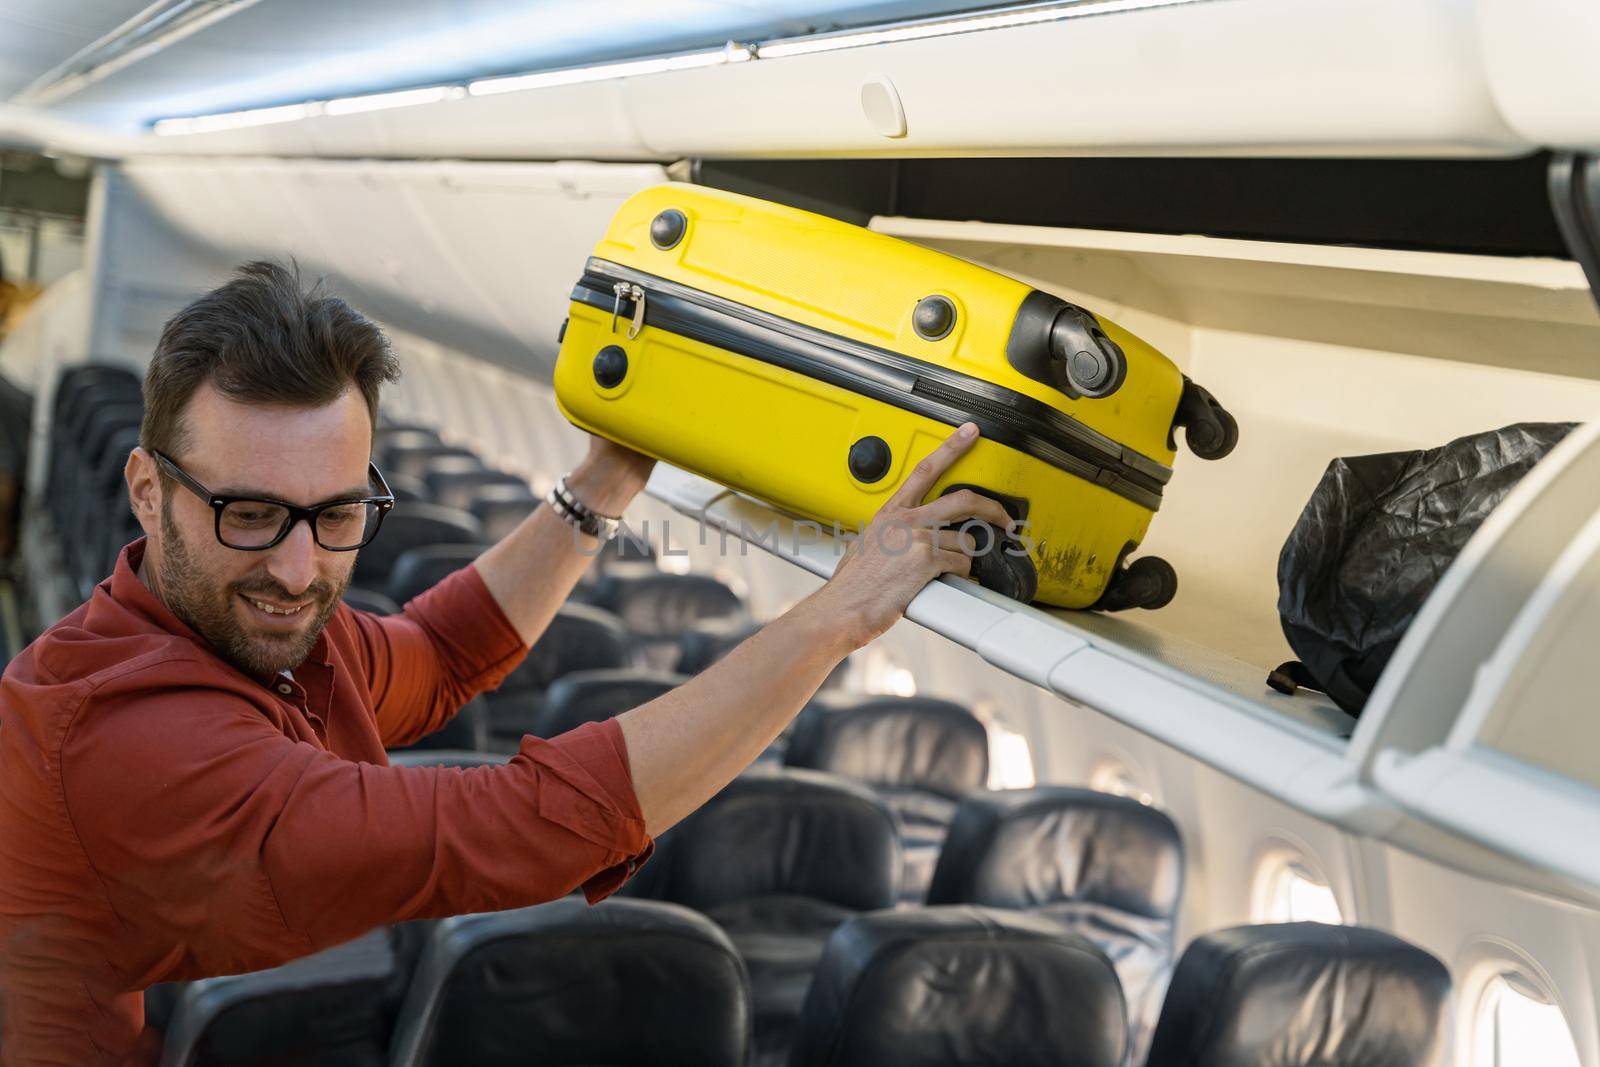 Smiling adult man with glasses putting a suitcase on a shelf in an airplane. Trip concept